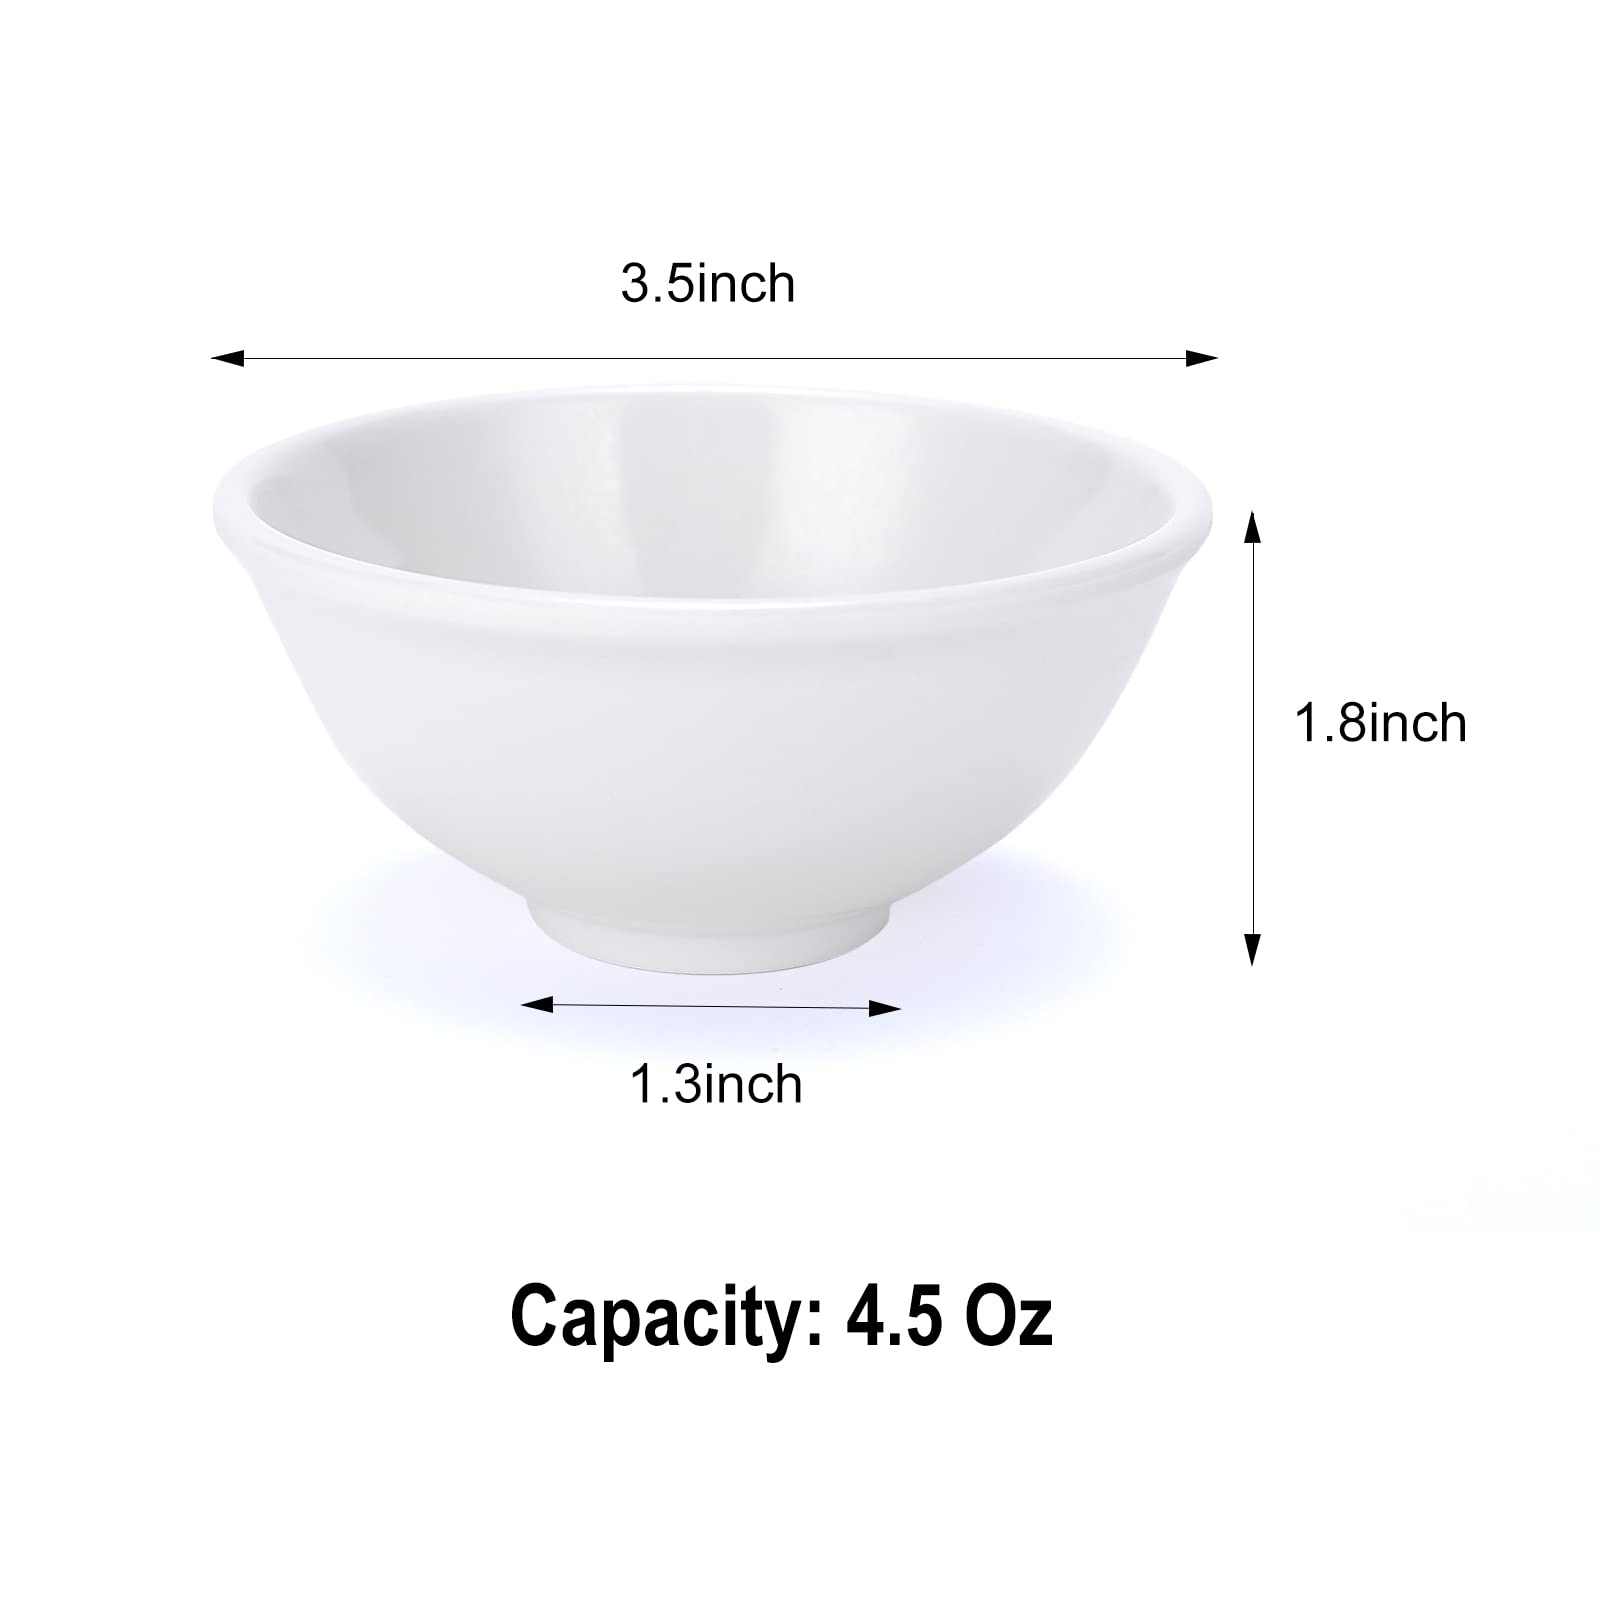 CookTaitai Mini Dipping Bowls Set, Soy Sauce Dishes 4.5 Oz 3.5 Inch Mini Bowls Set,Unbreakable Melamine Plastic Bowls for BBQ Sauce, Seasoning Condiments Appetizer, White,12 Pack